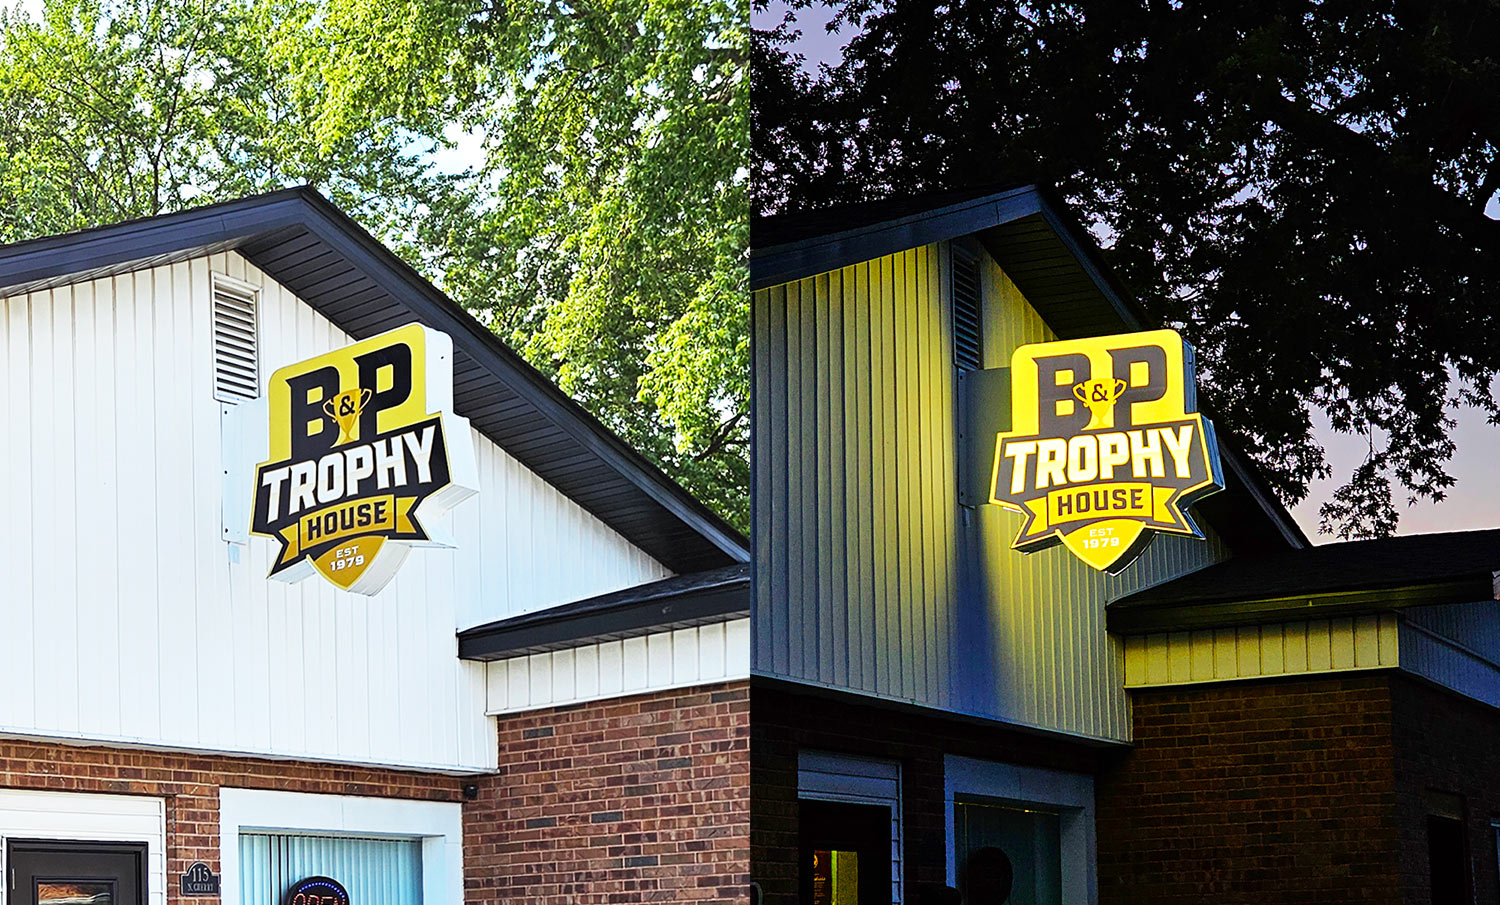 B&P Trophy's new sign design from VL logo